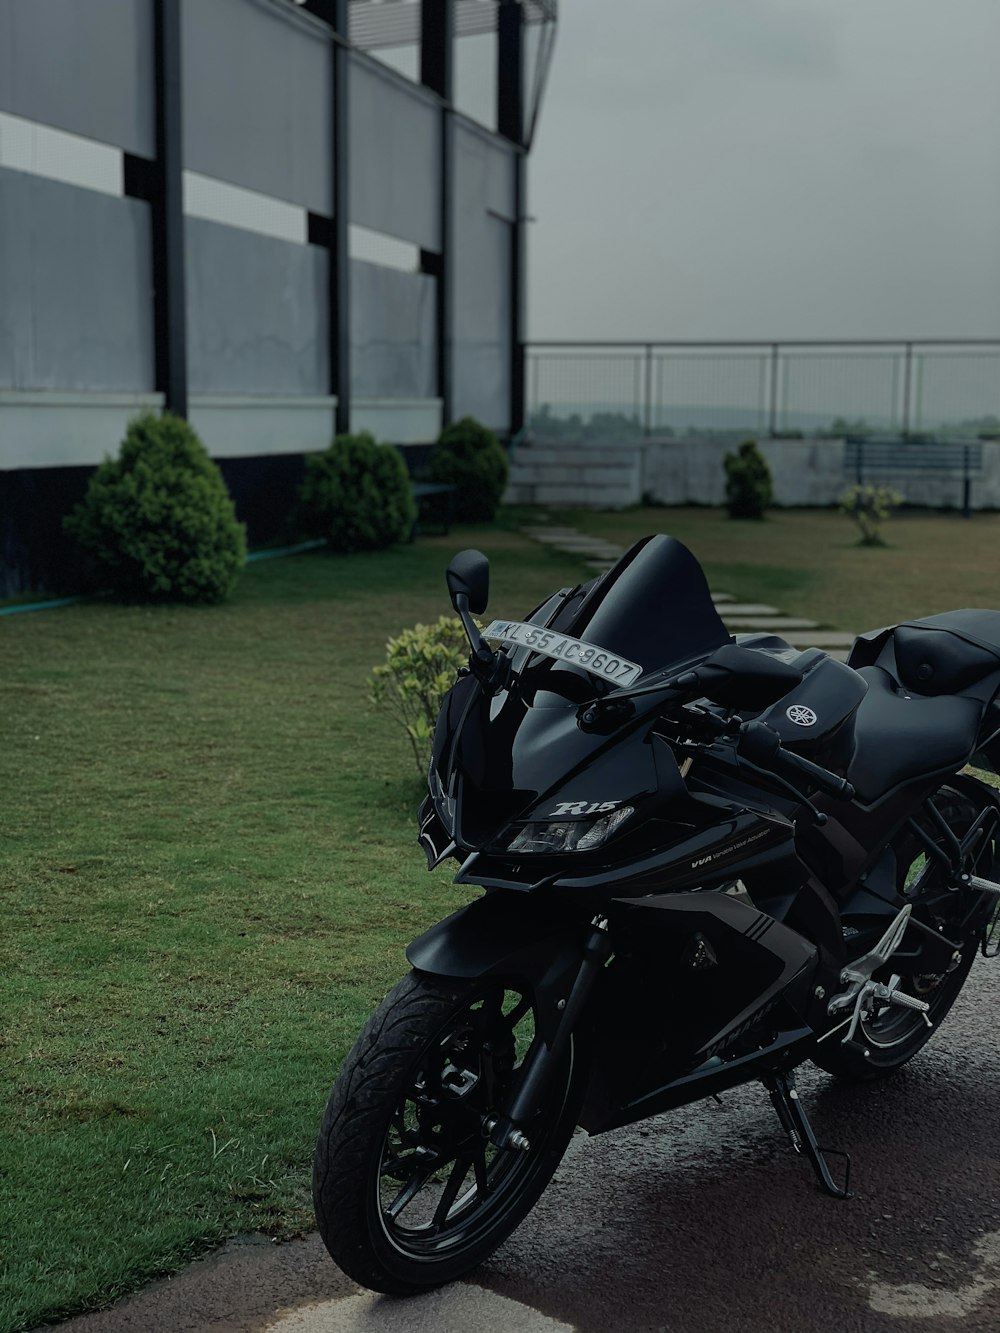 black sports bike parked on green grass field during daytime